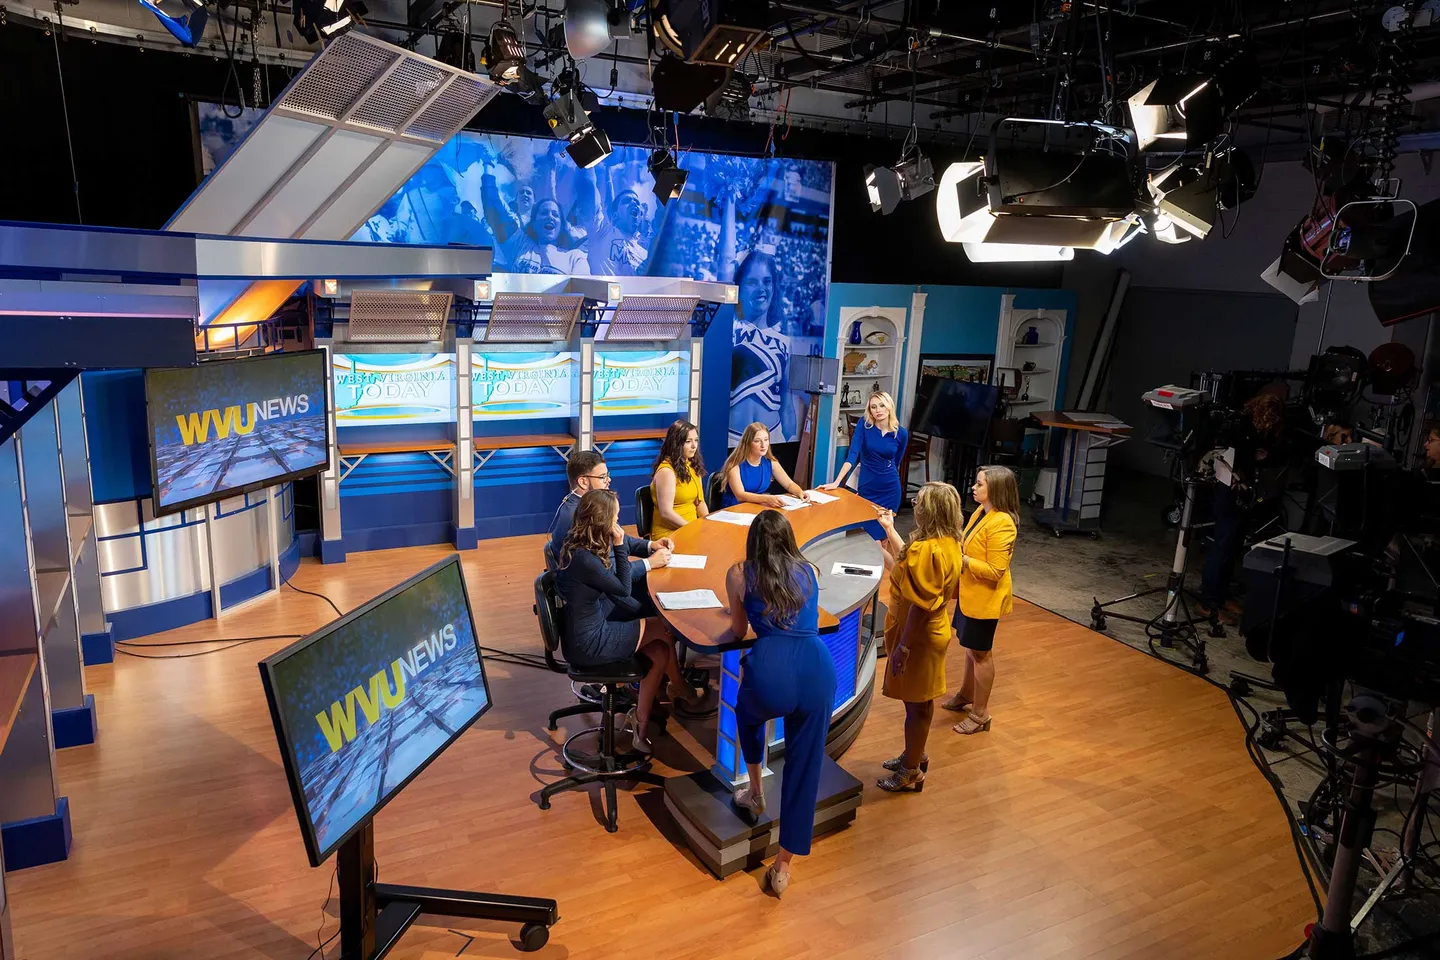 The WVU News team prepares for a broadcast in the studio.